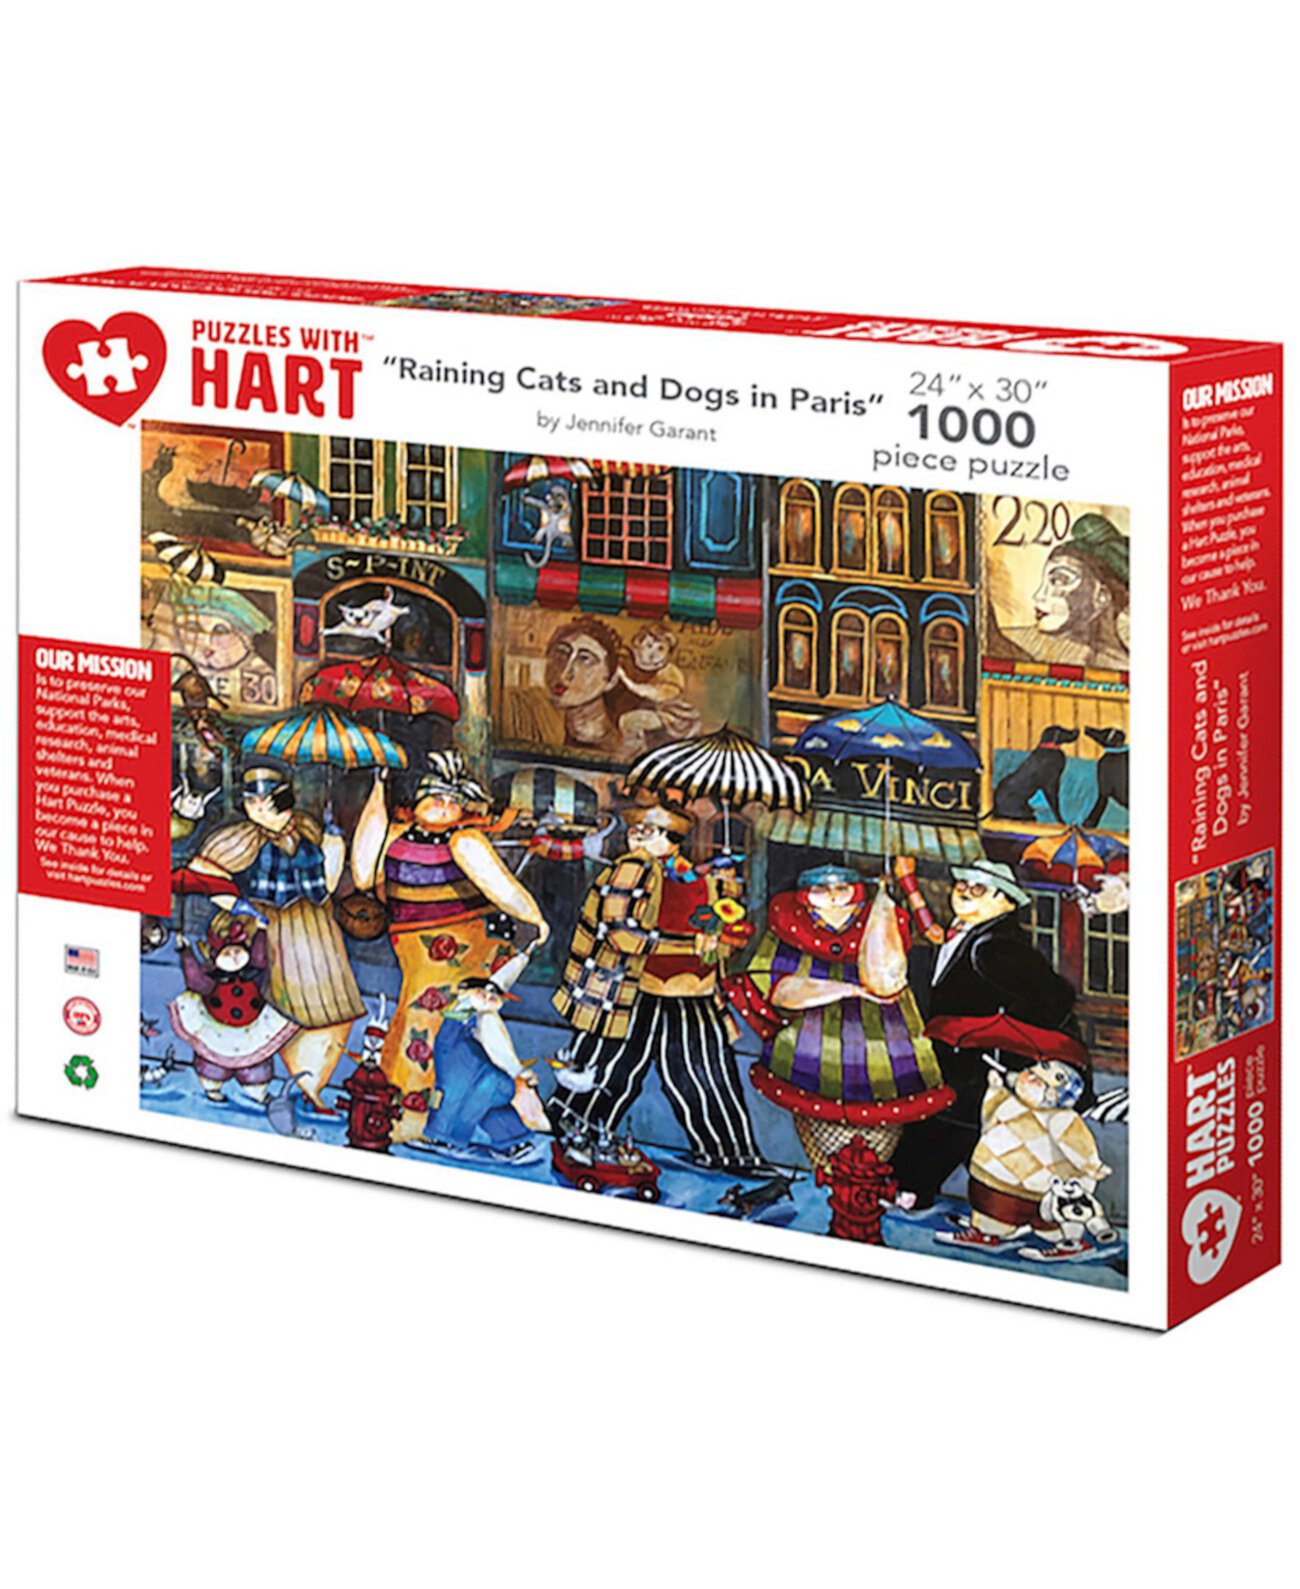 Raining Cats and Dogs In Paris 24" x 30" by Jennifer Garant Set, 1000 штук Hart Puzzles